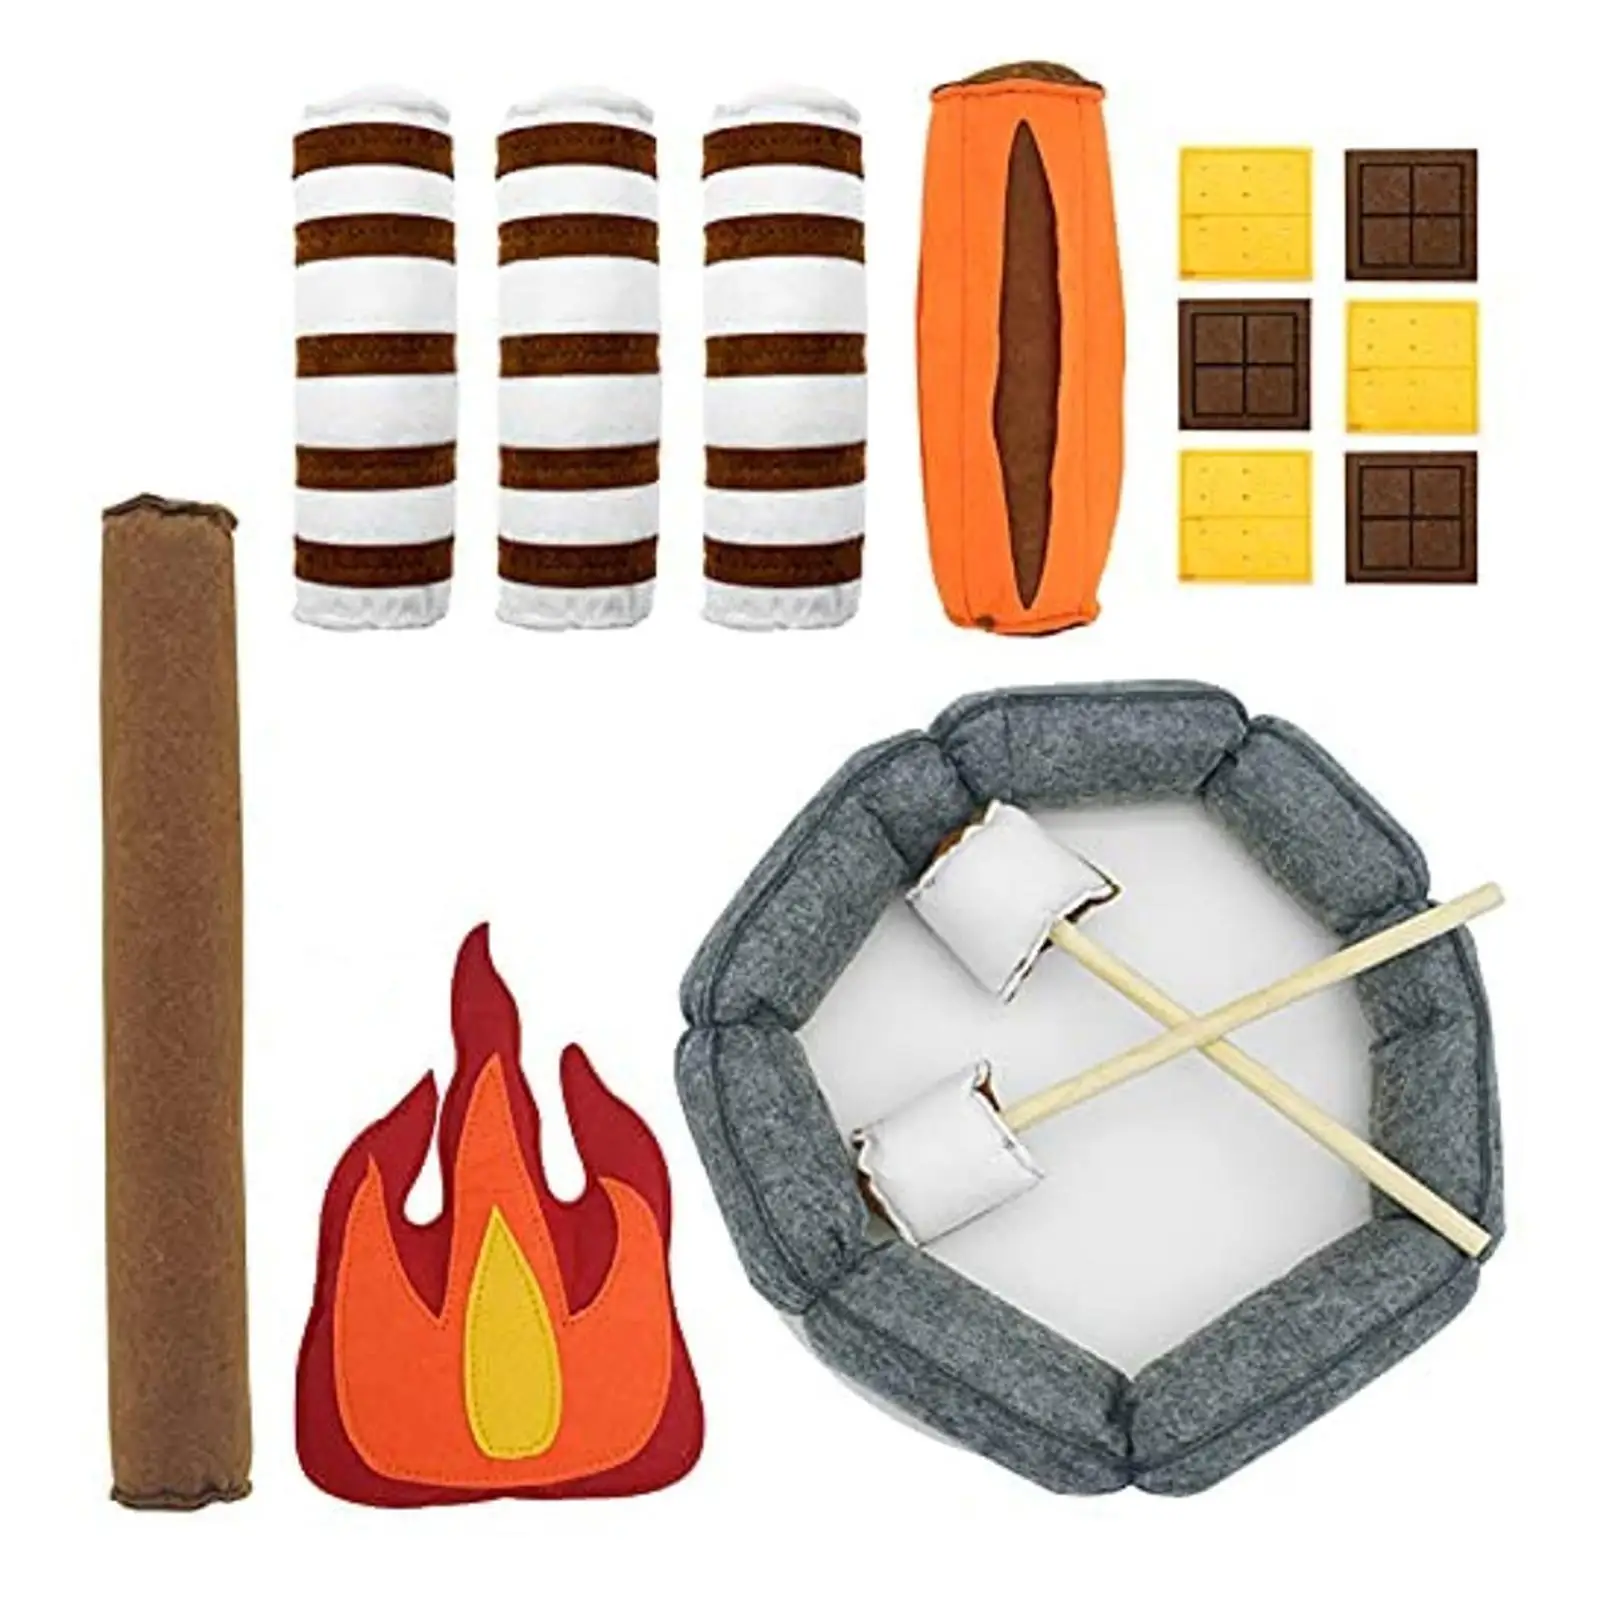 Pretend Play Campfire Funny Needfire Branch Outdoor Camping Toys Housewarming Gifts Bedroom Stuffed Doll Camping Toy Playing Set